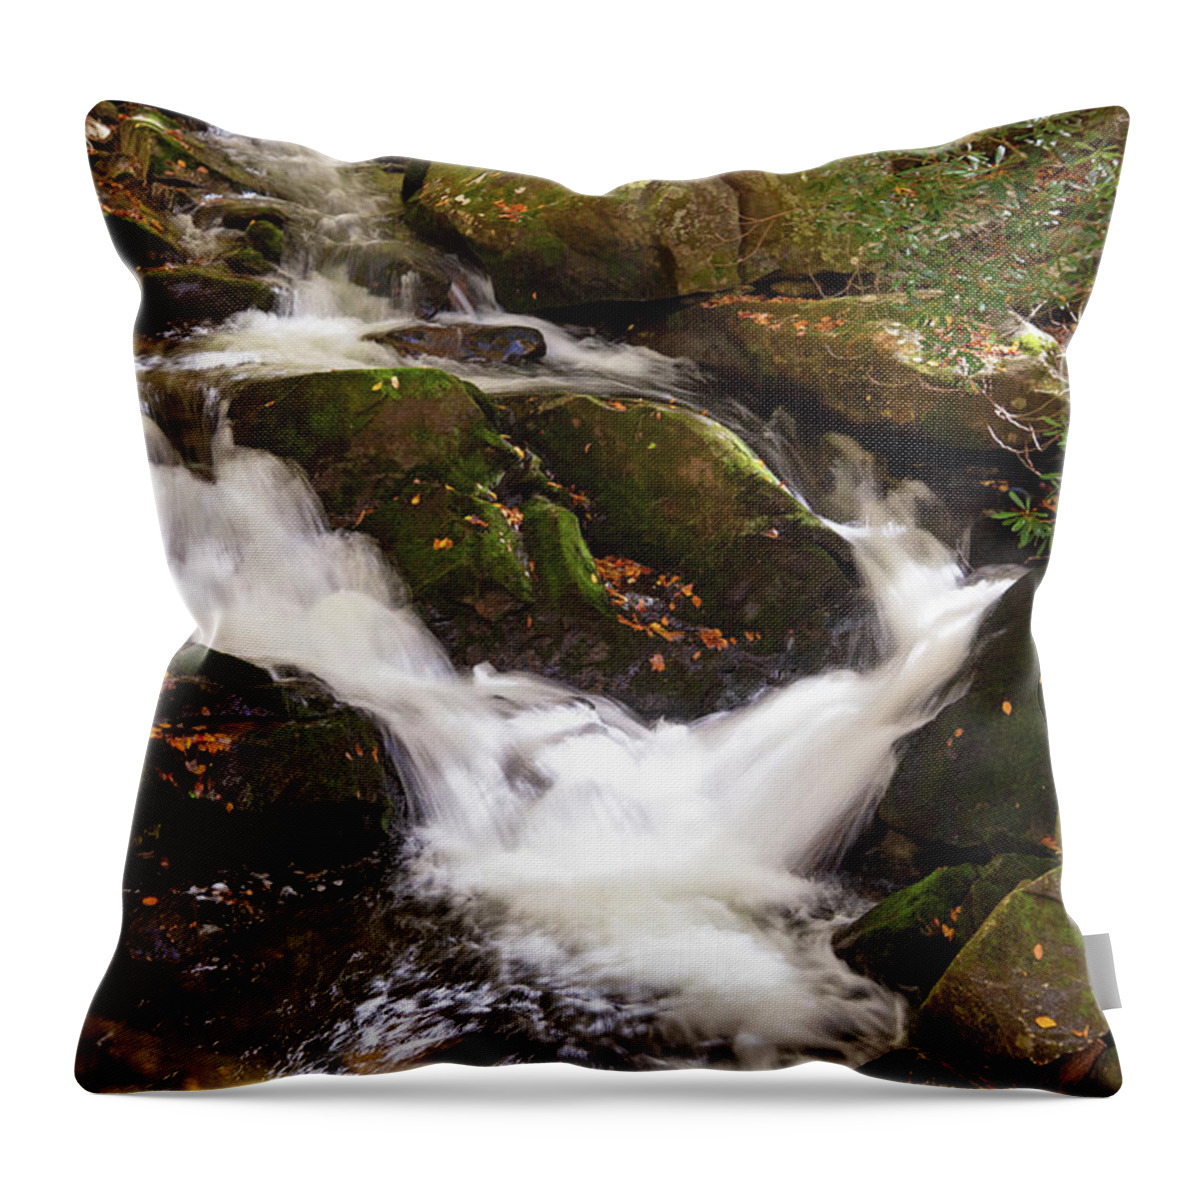 Stream Throw Pillow featuring the photograph Roadside Beauty by Gina Fitzhugh